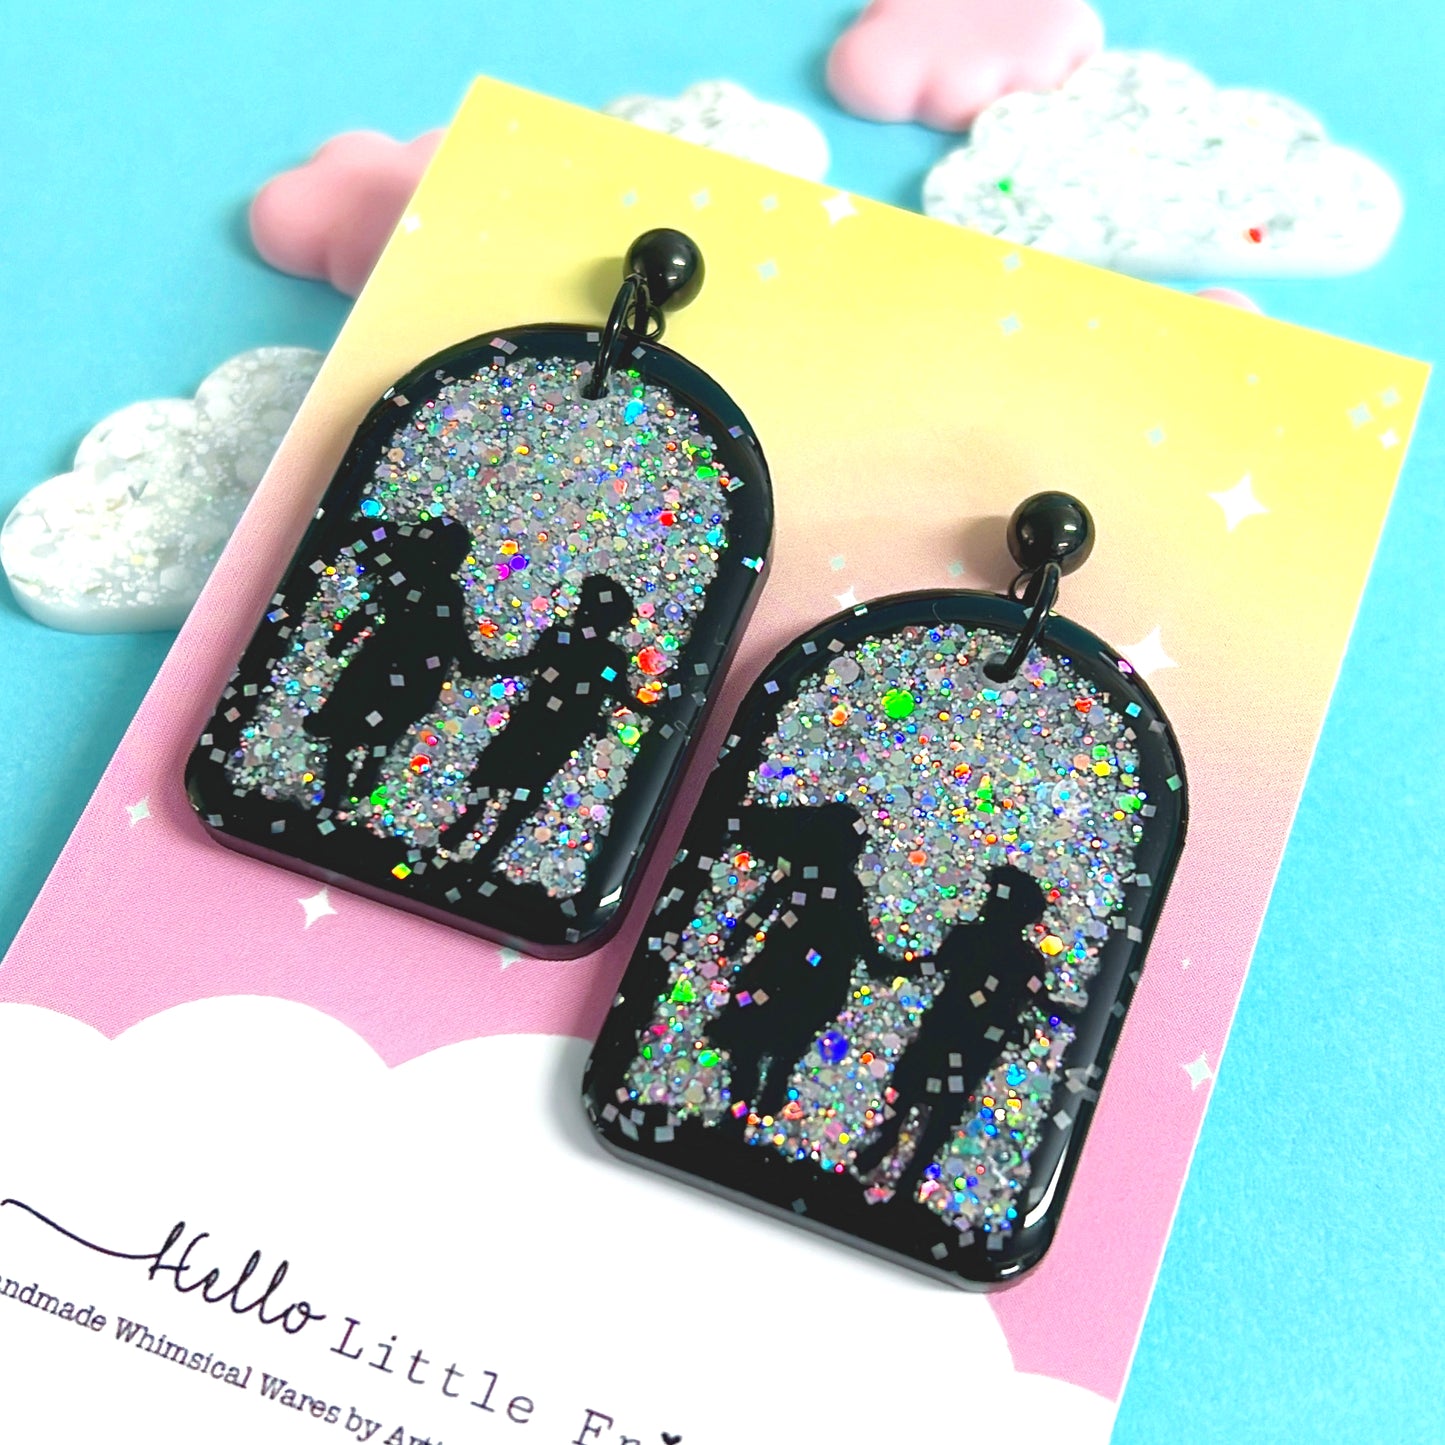 THE BEST FRIENDS COLLECTION : Choose your design : Handmade Holographic Resin DROP Earrings